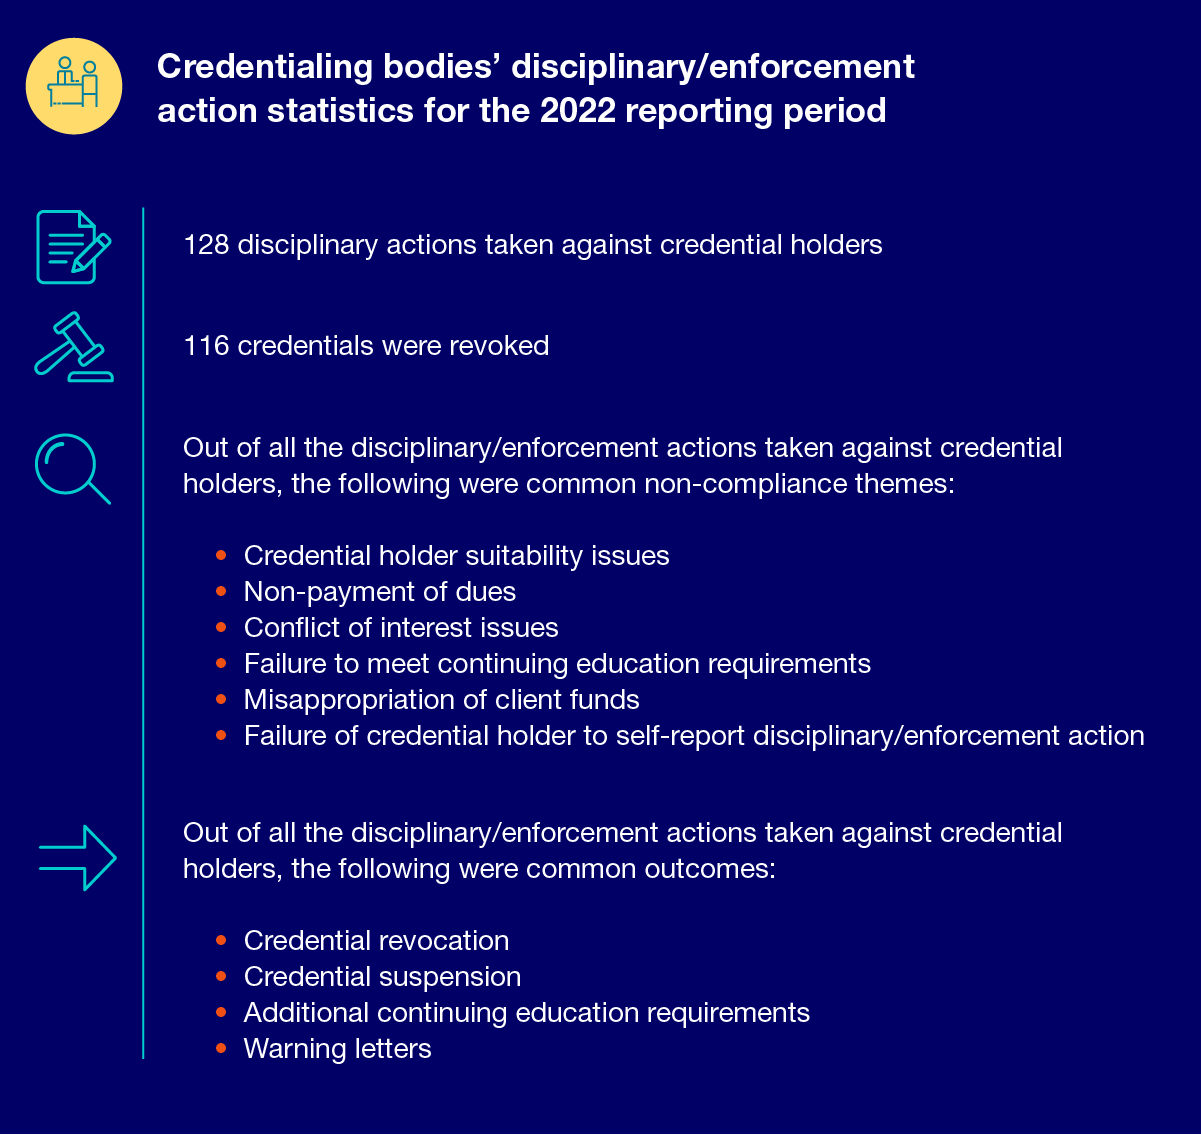 Credentialing bodies’ disciplinary/enforcement action statistics for the 2022 reporting period